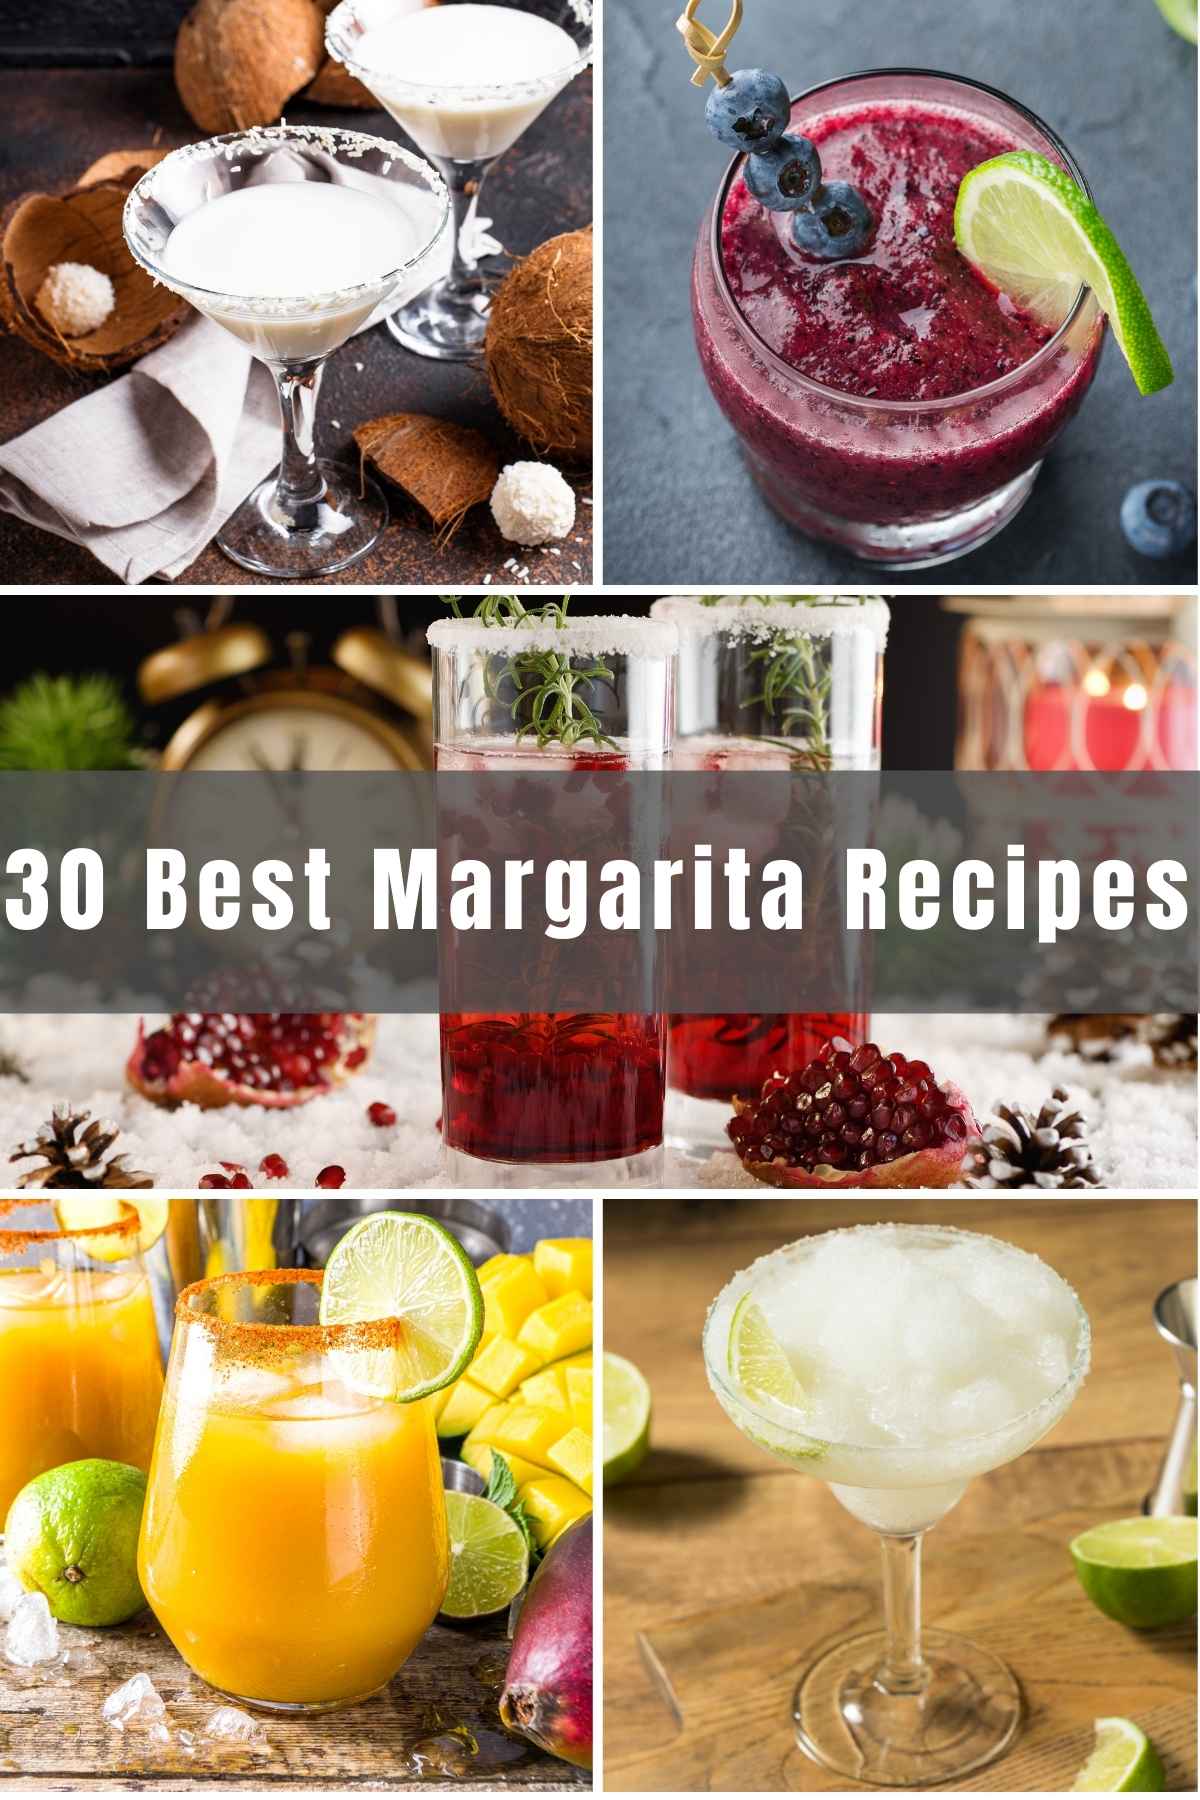 Did somebody say margaritas?! These insanely popular cocktails always signal the start of a good time. You’ve probably had the classic lime version, but did you know that there are endless margarita possibilities? We’ve collected 30 of the Best Margarita Recipes for you to try at home.